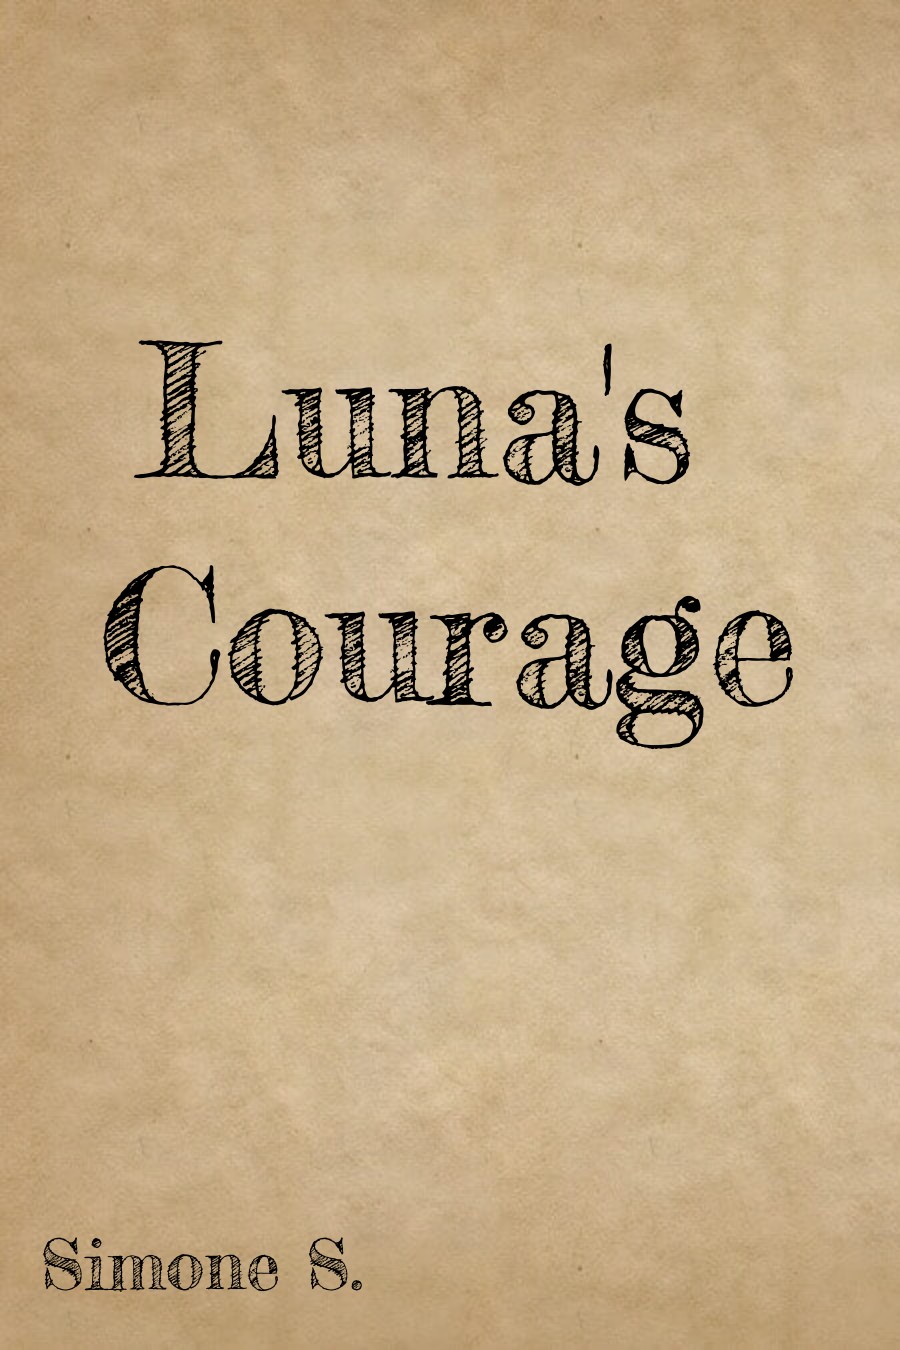 Luna’s Courage by Simone S